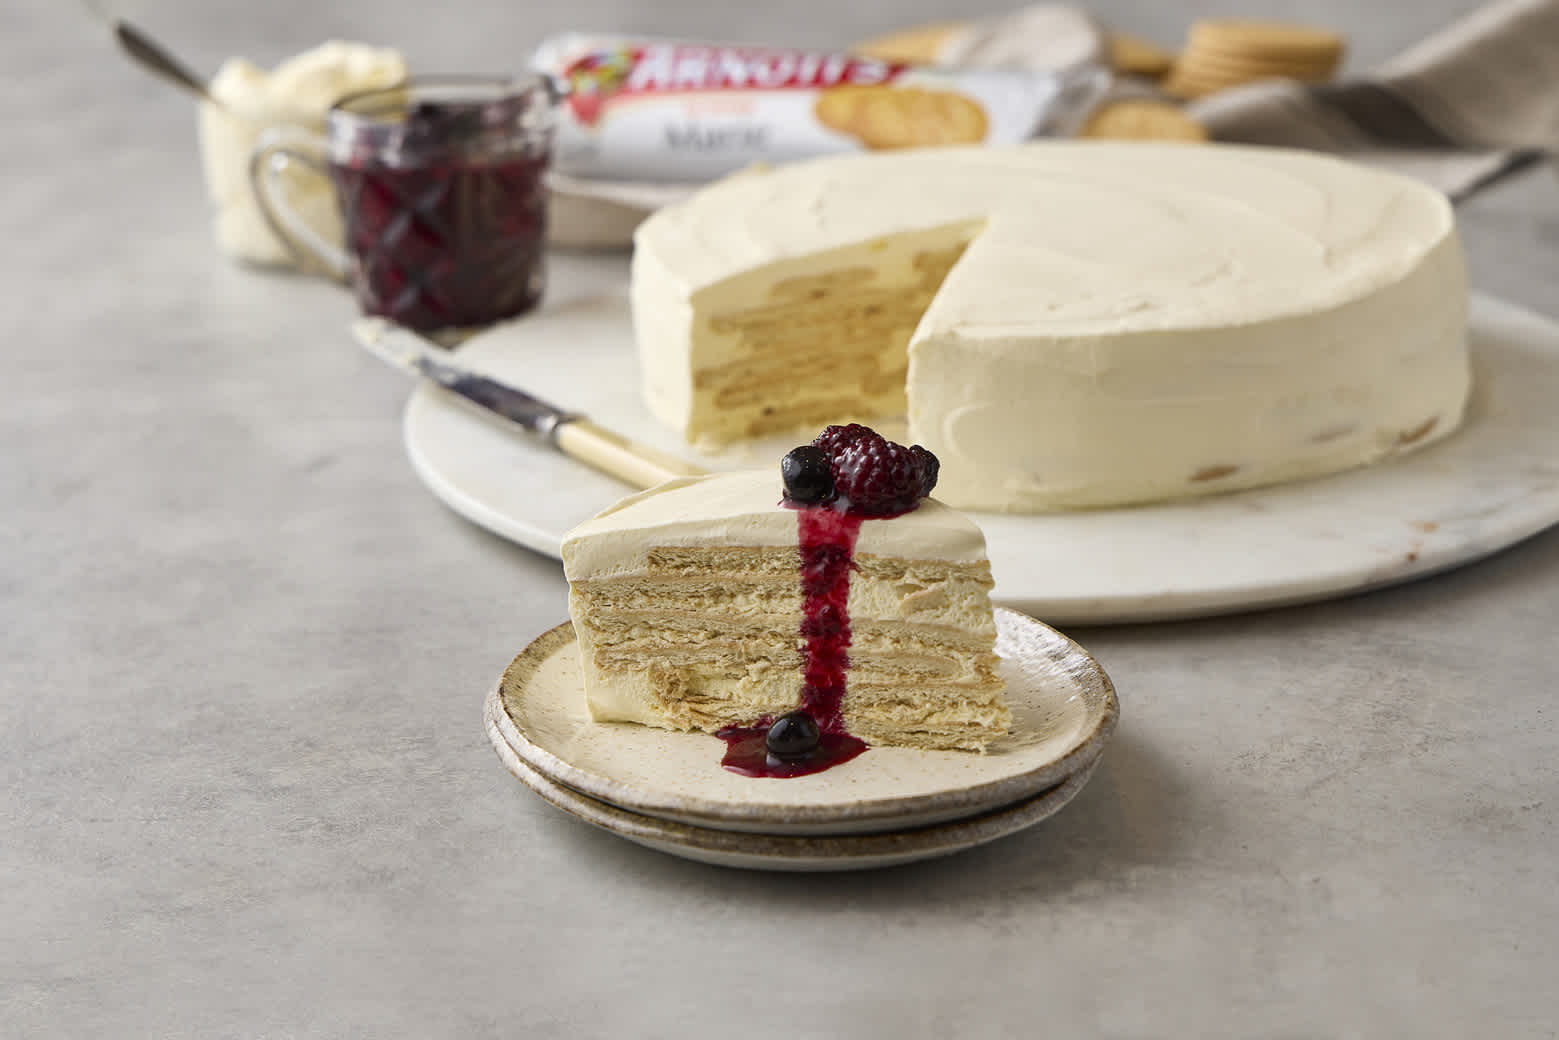 Picture of Arnott's Marie Cake, served with berry compote, pictured with Arnott's Marie Biscuits